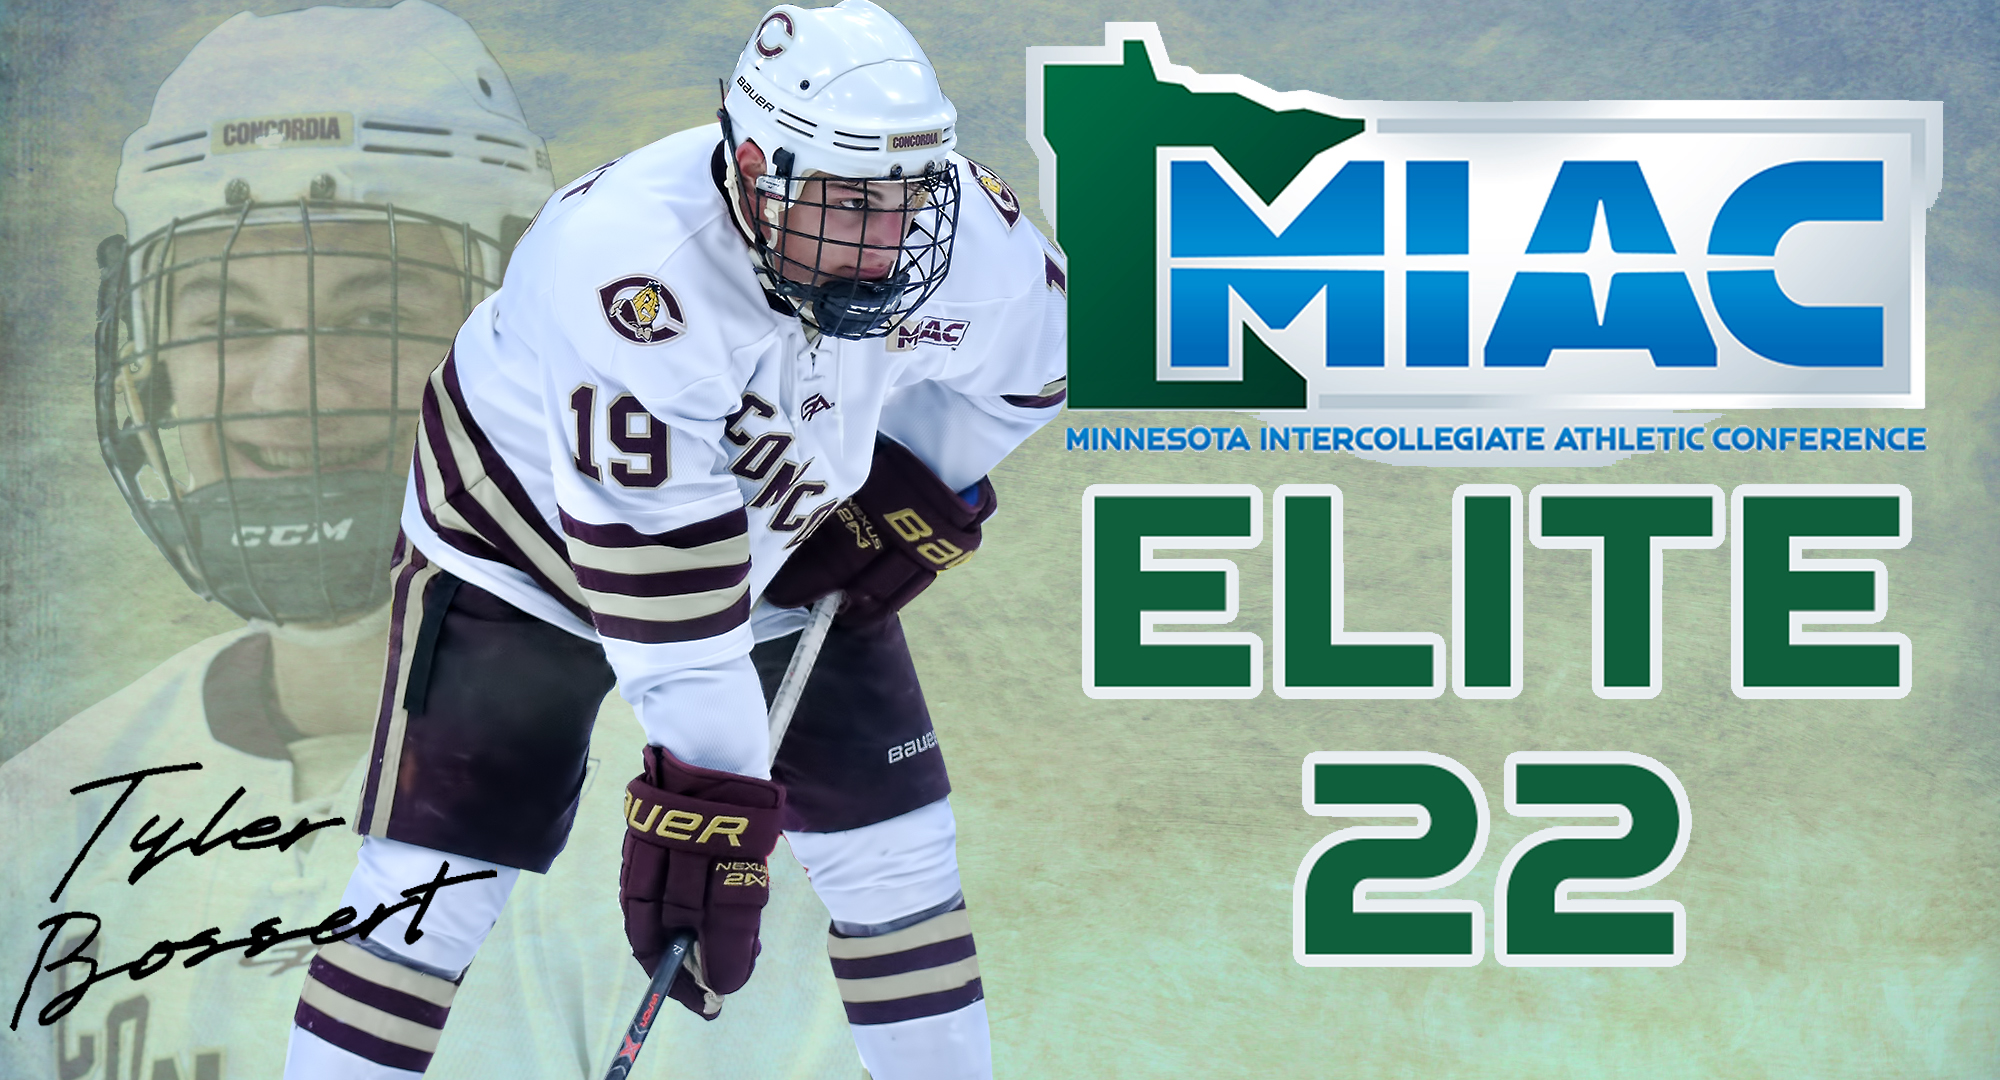 Tyler Bossert, who has a 3.98 GPA while majoring in Business, was named the winner of the MIAC Elite 22 award.